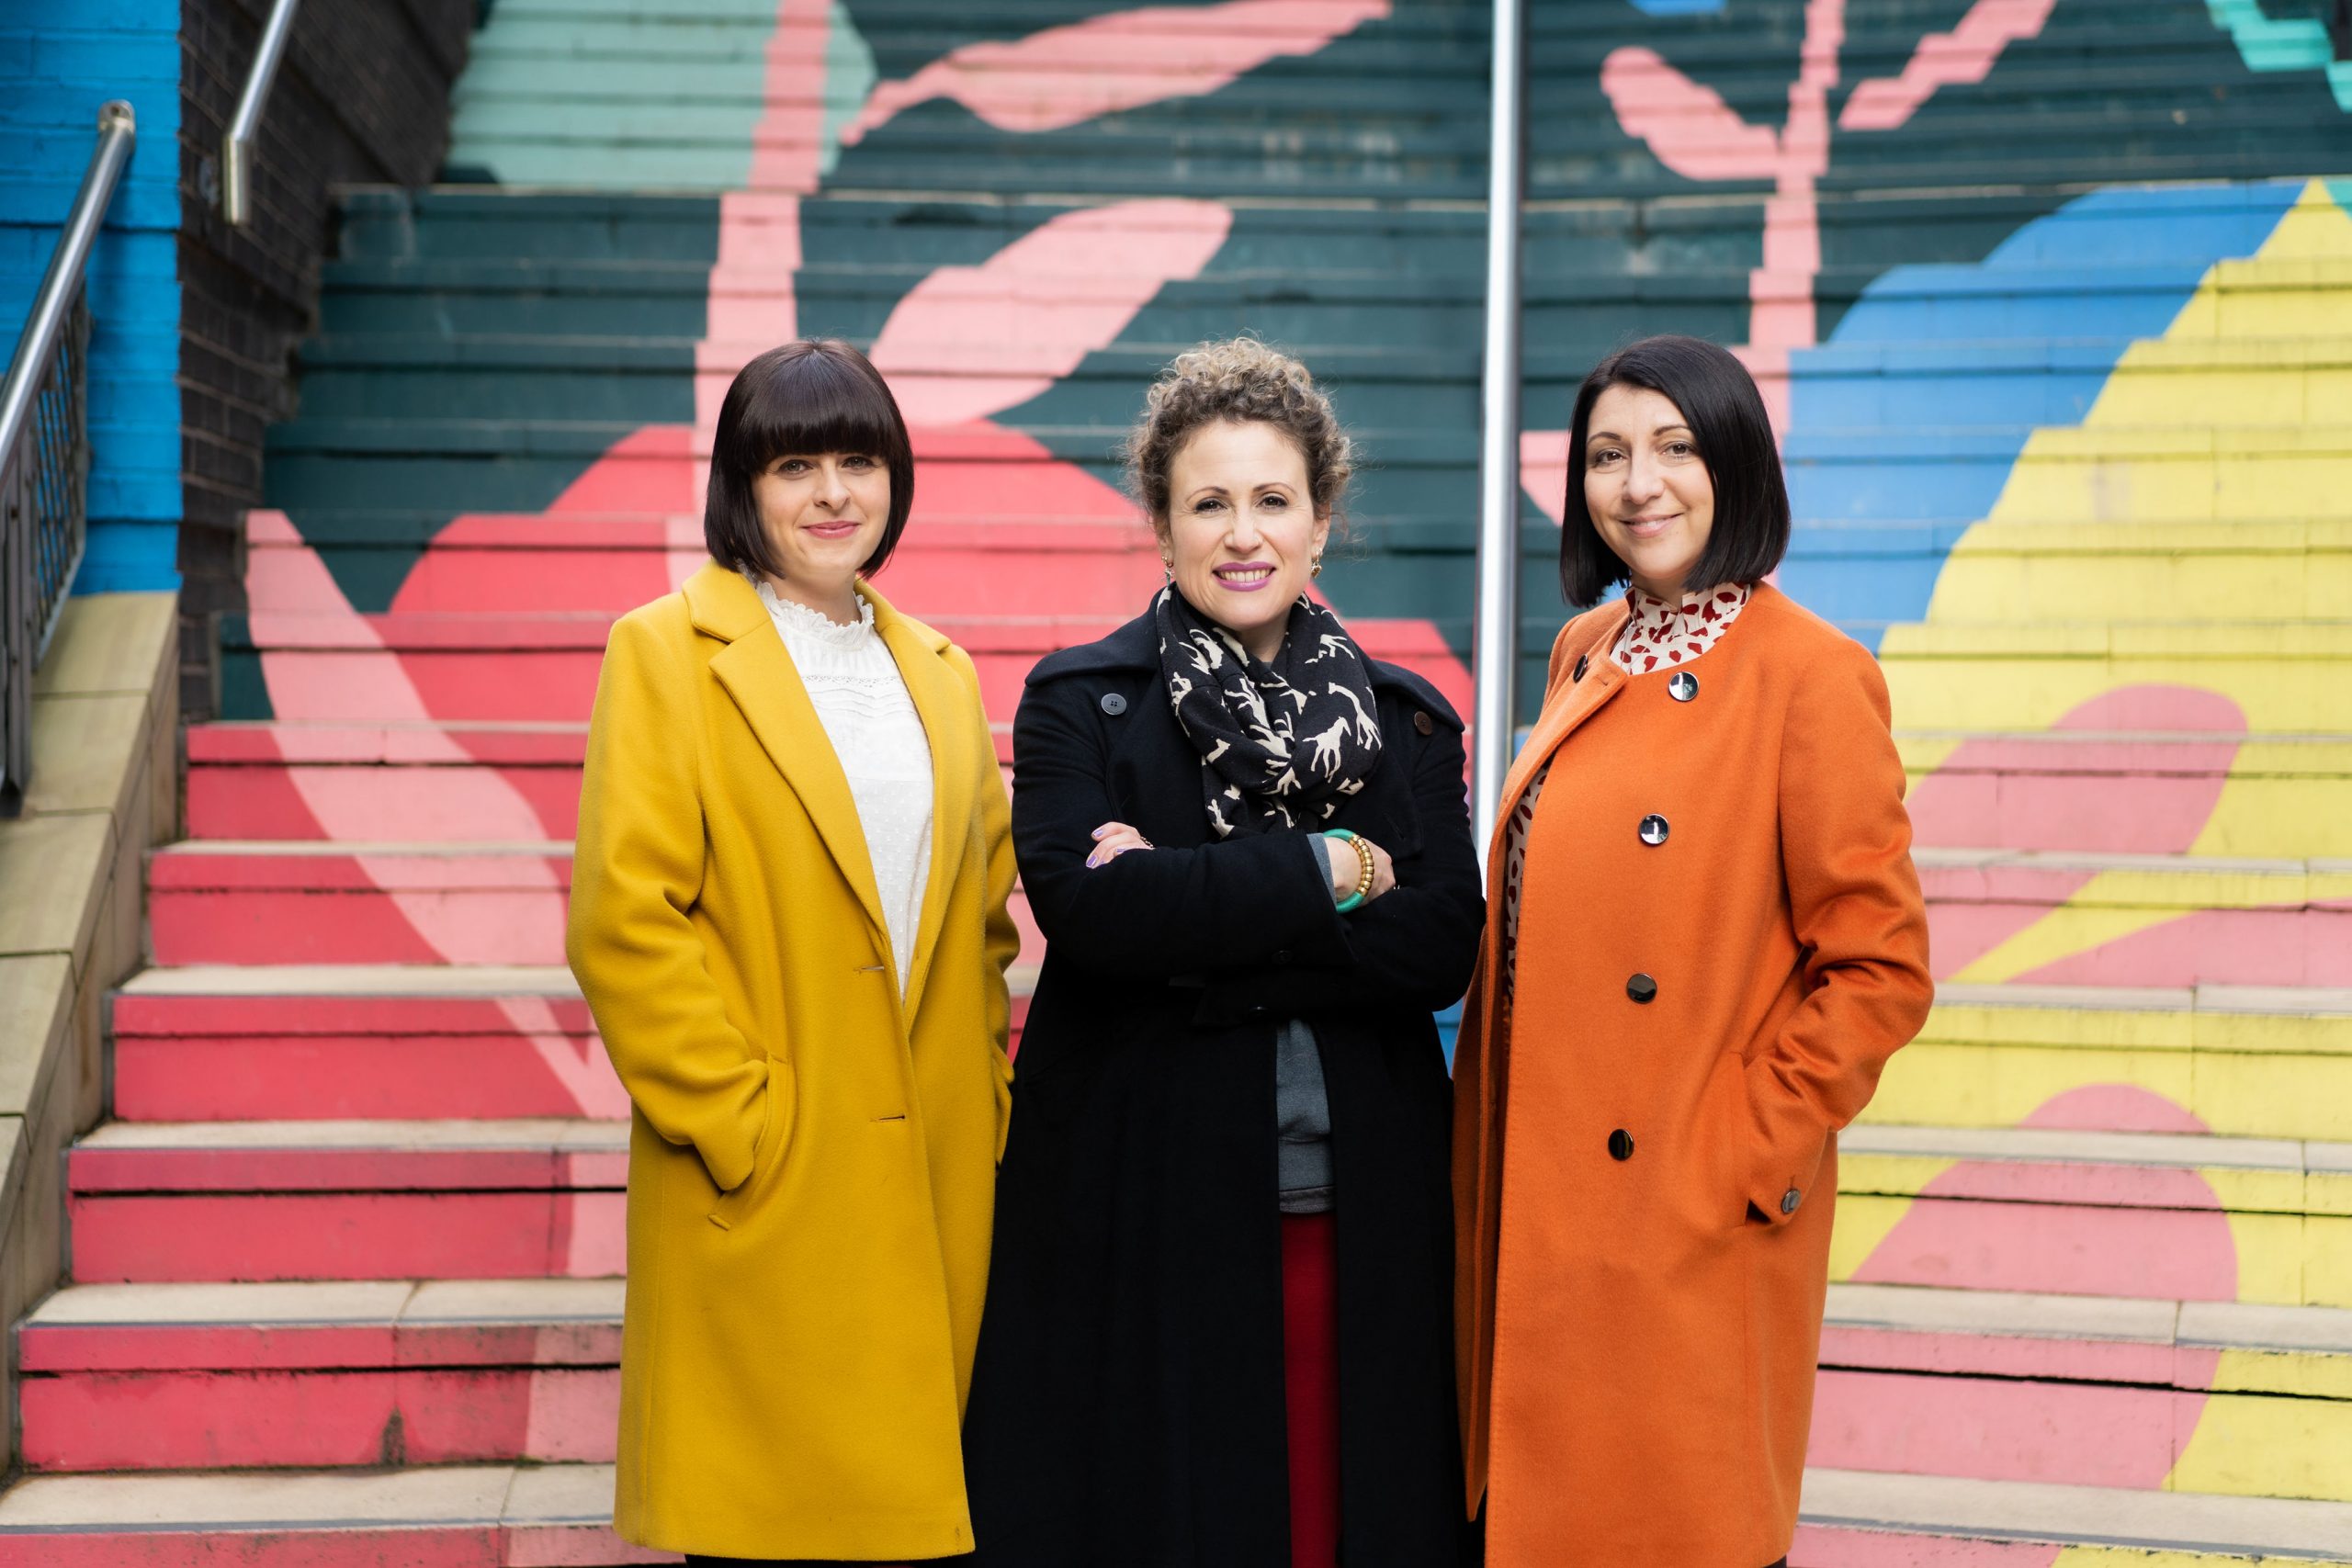 Wild PR secures partnership to raise awareness of fertility issues in the workplace